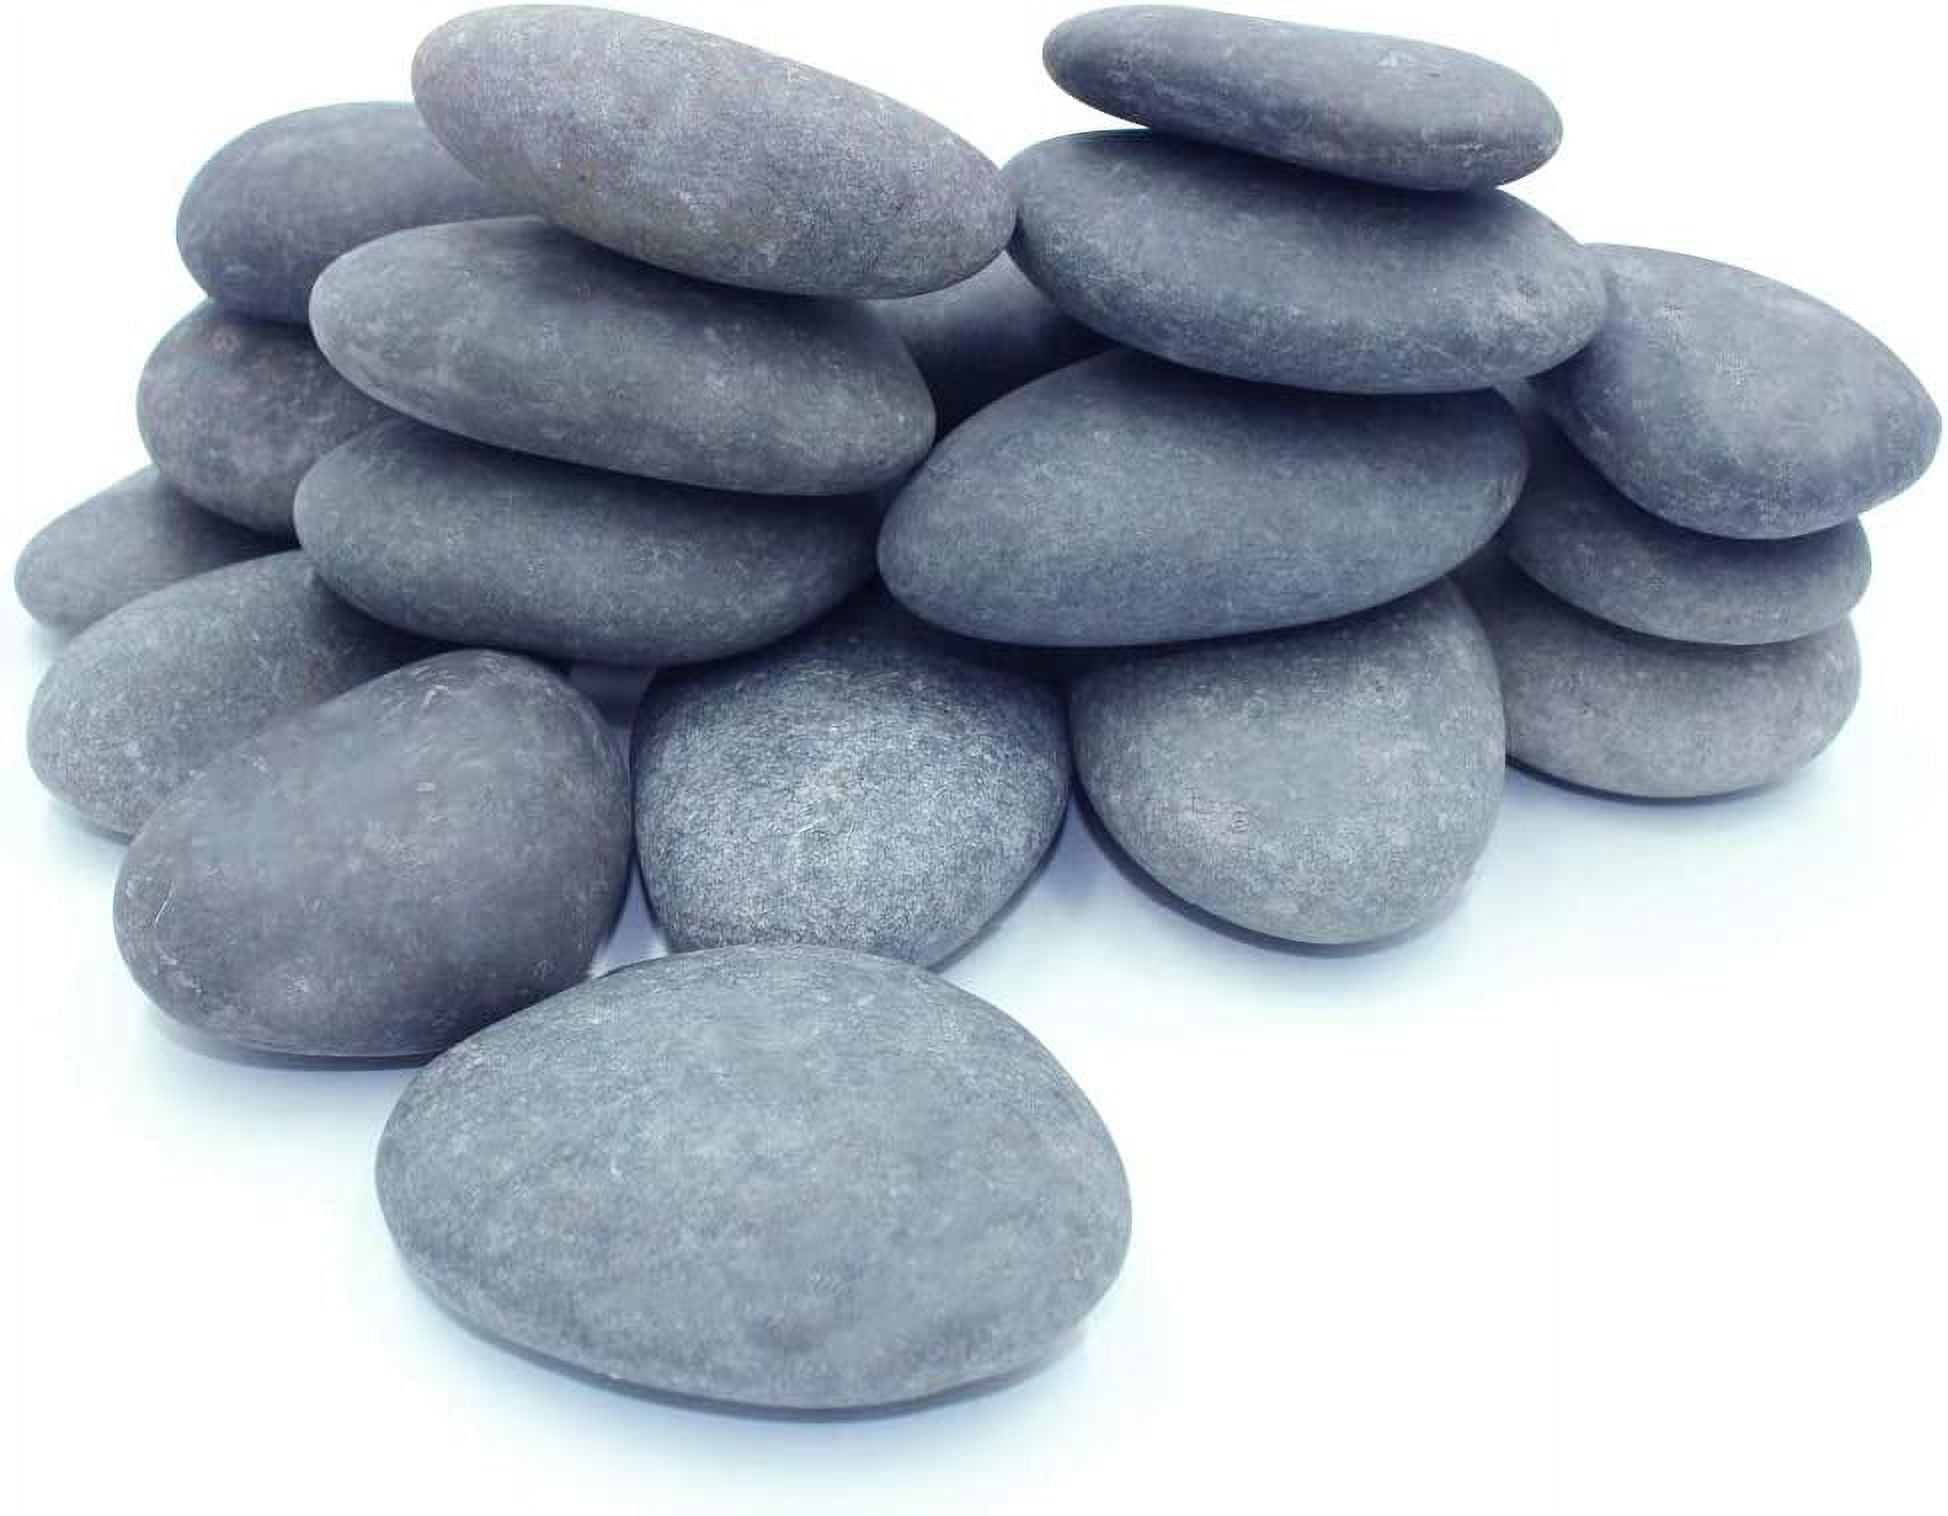 White River Rocks for Rock Painting, 40 Super Smooth Flat Rocks, 2” - 3.5”  in